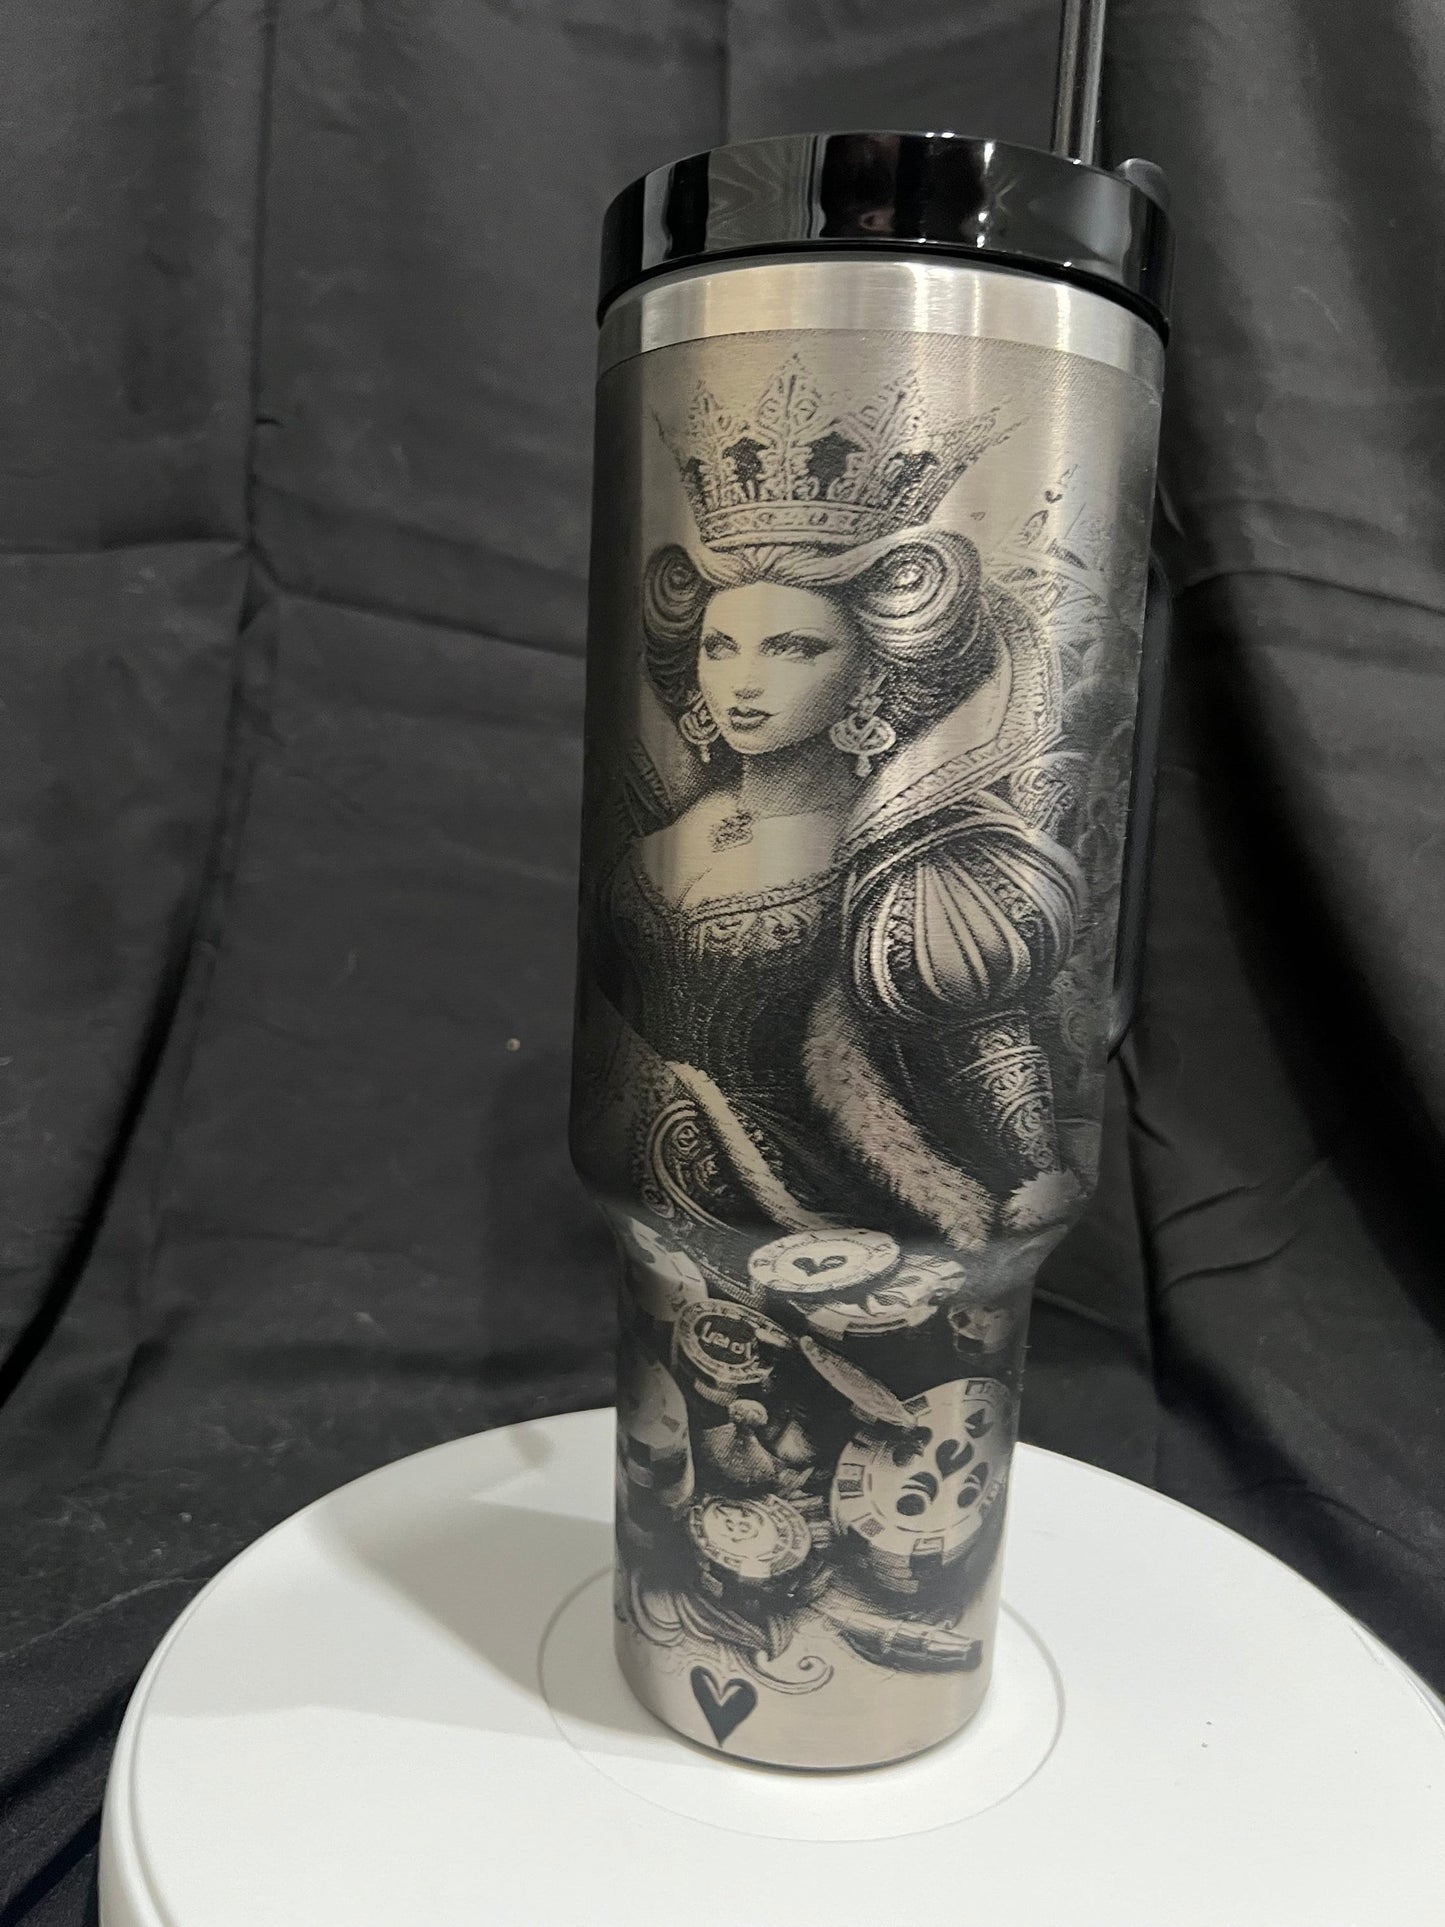 V2 Queen of Hearts Laser Engraved 40oz Black Tumbler with Handle, FREE SHIPPING!